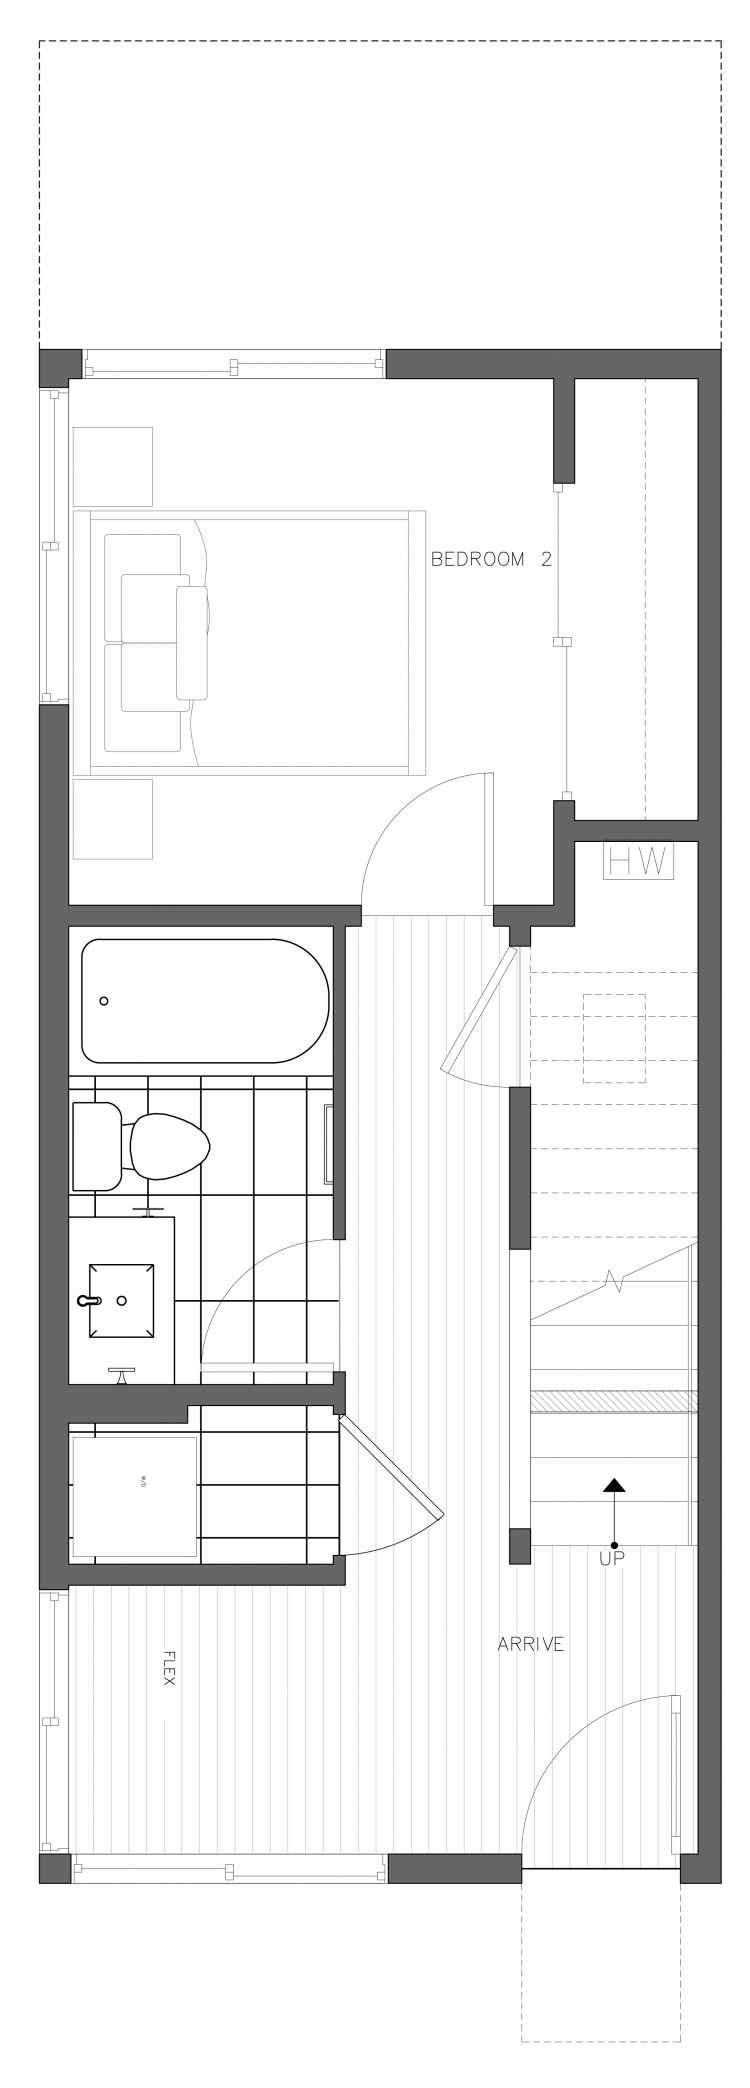 First Floor Plan of 3410A 15th Ave W, One of the Arlo Townhomes in North Queen Anne